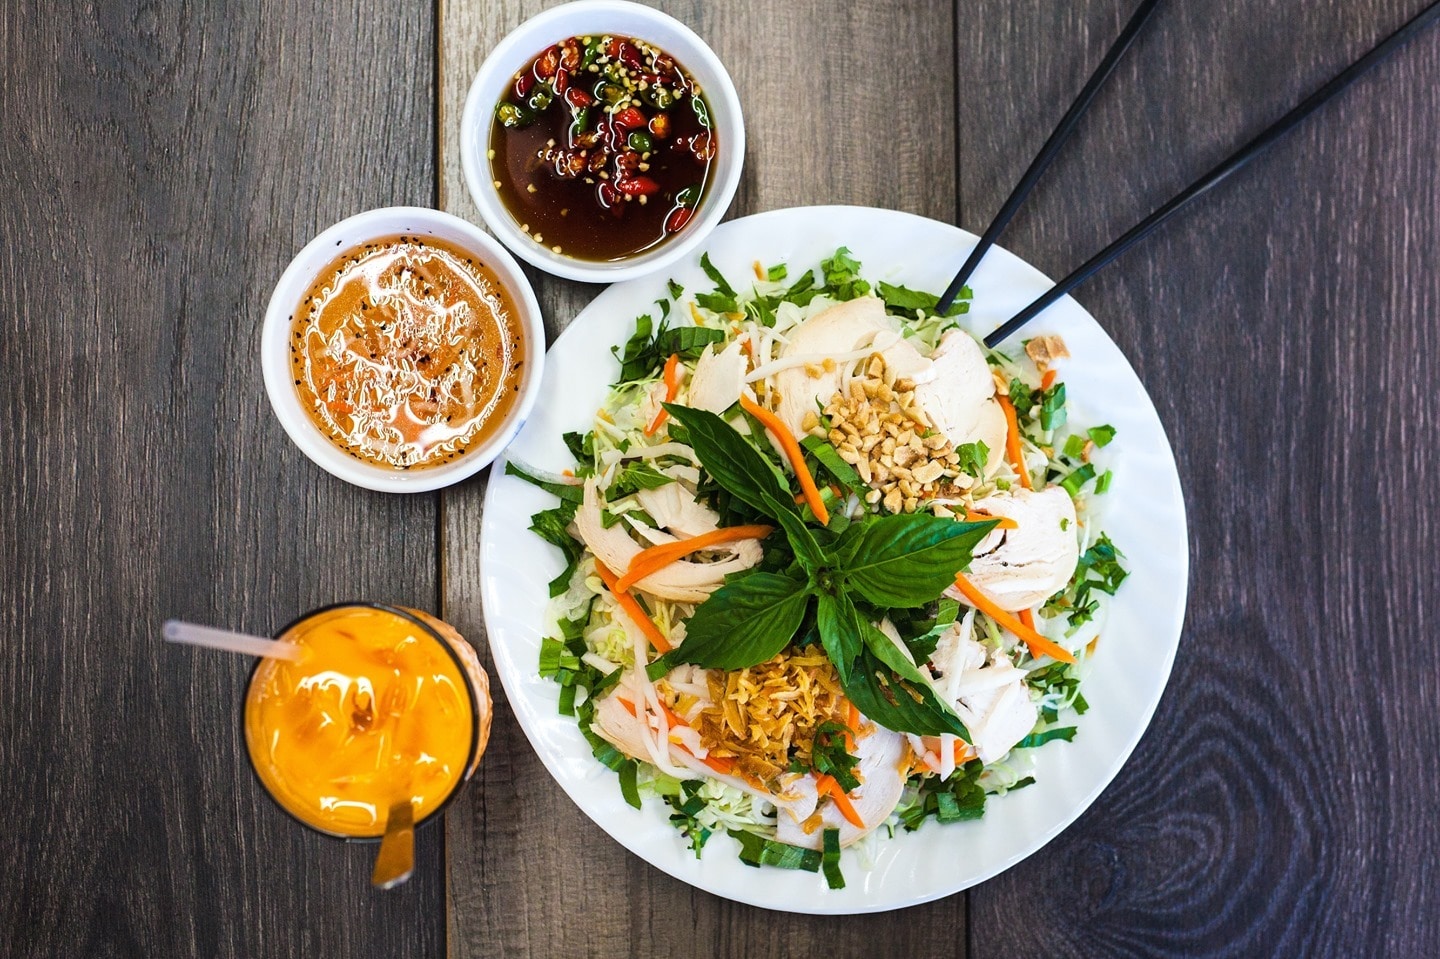 Get ready to take your taste buds on a trip to Southeast Asia at An Di Dzo, coming to Ward Entertainment Center by the end of the year. An Di Dzo will blend old and new with its creative and contemporary Vietnamese dishes, available for lunch and dinner.